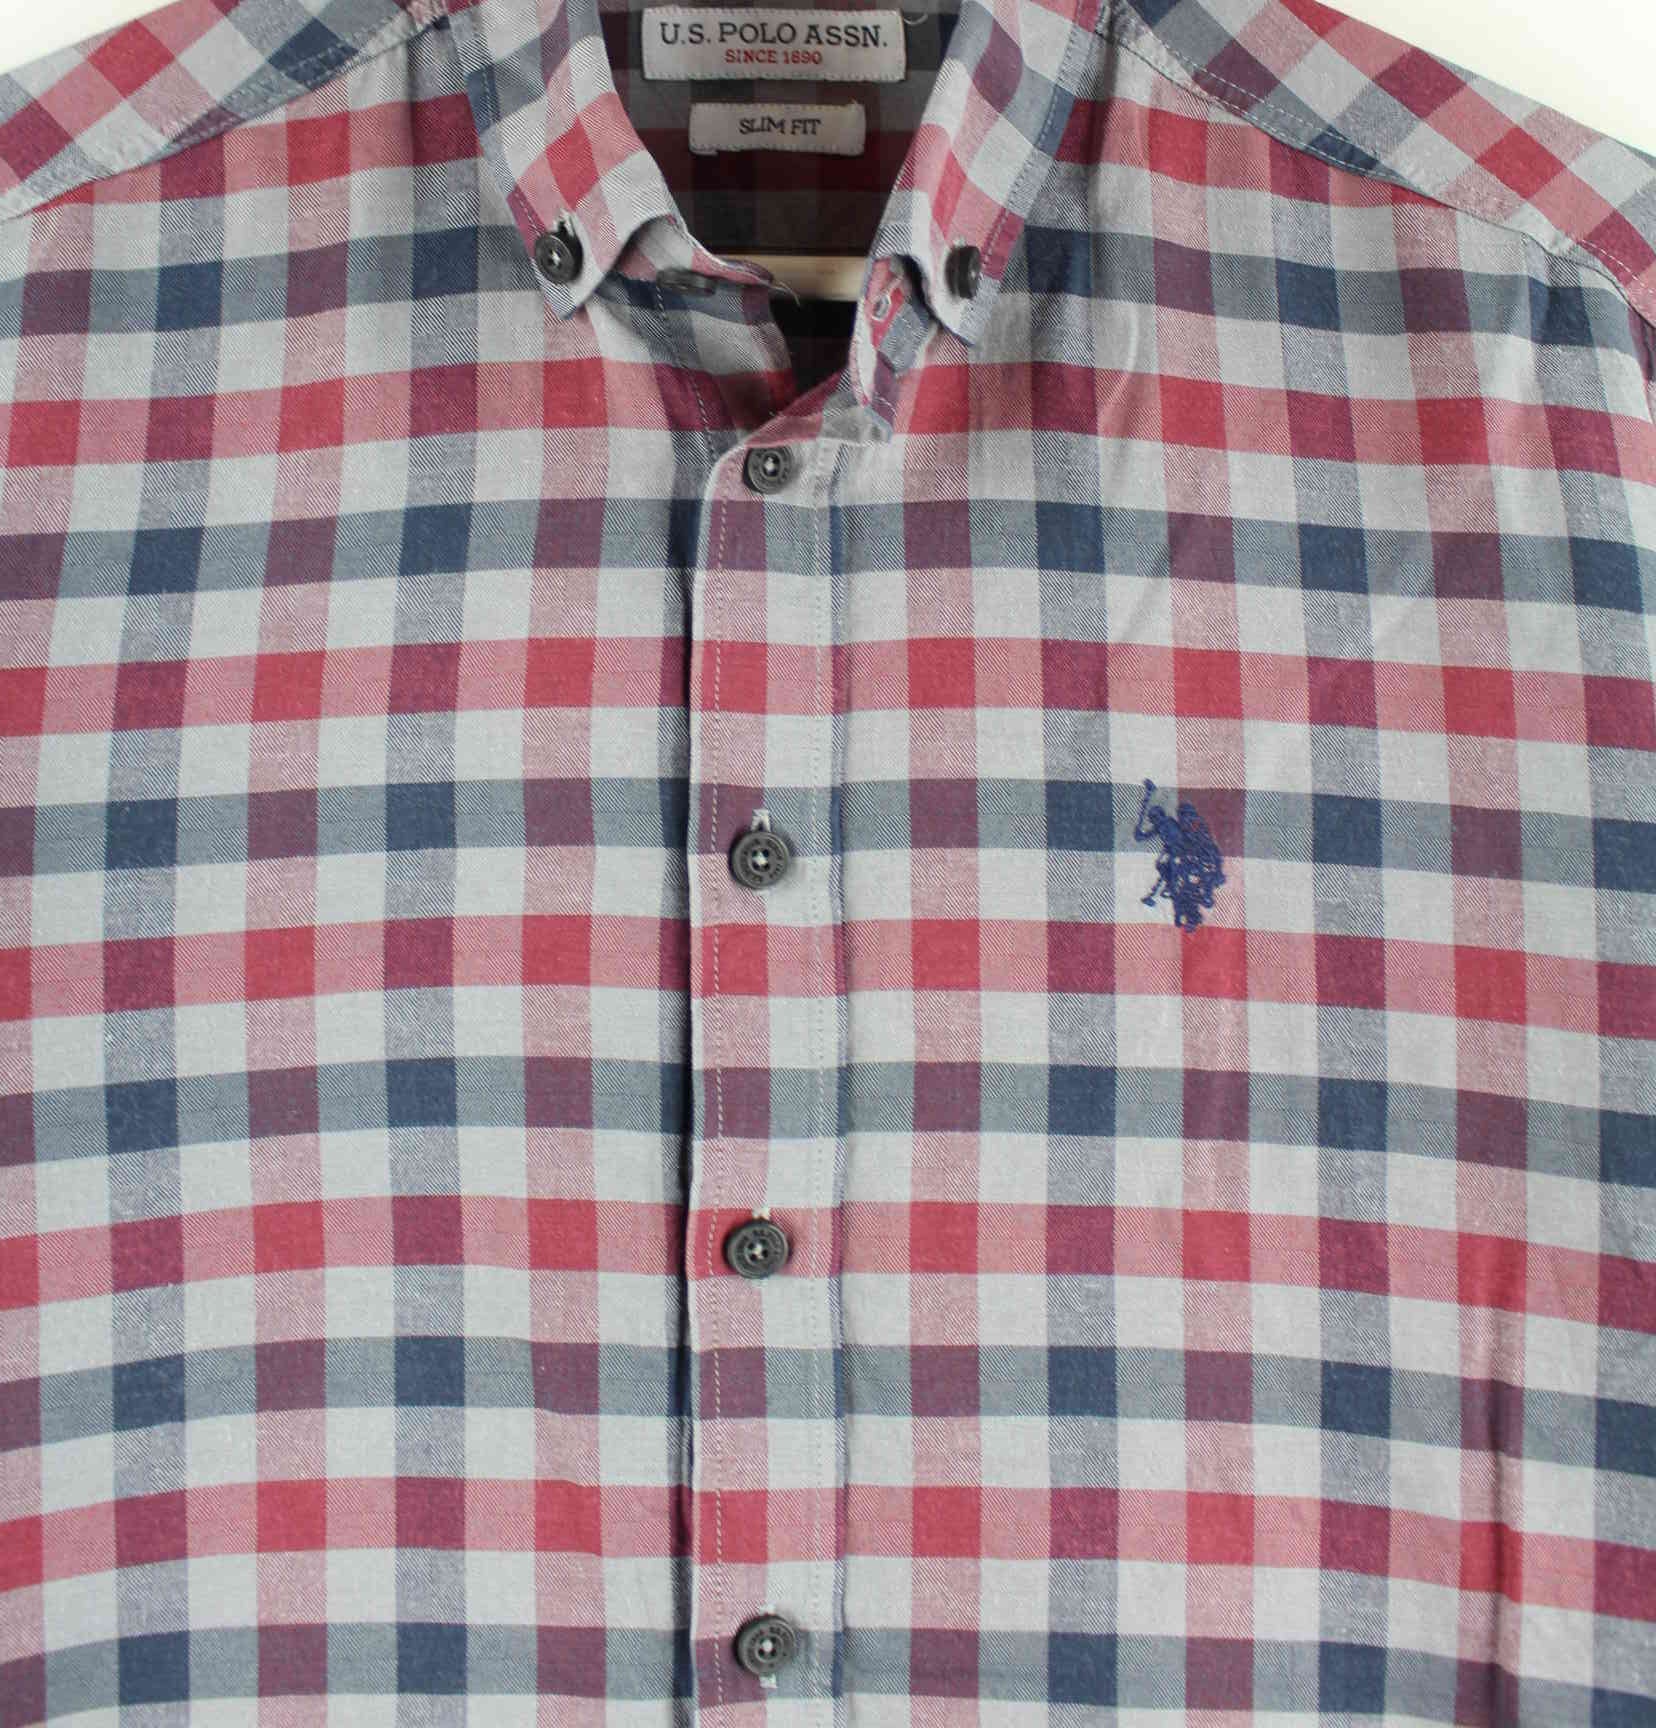 U.S. Polo ASSN. Slim Fit Checked Hemd Mehrfarbig S (detail image 1)